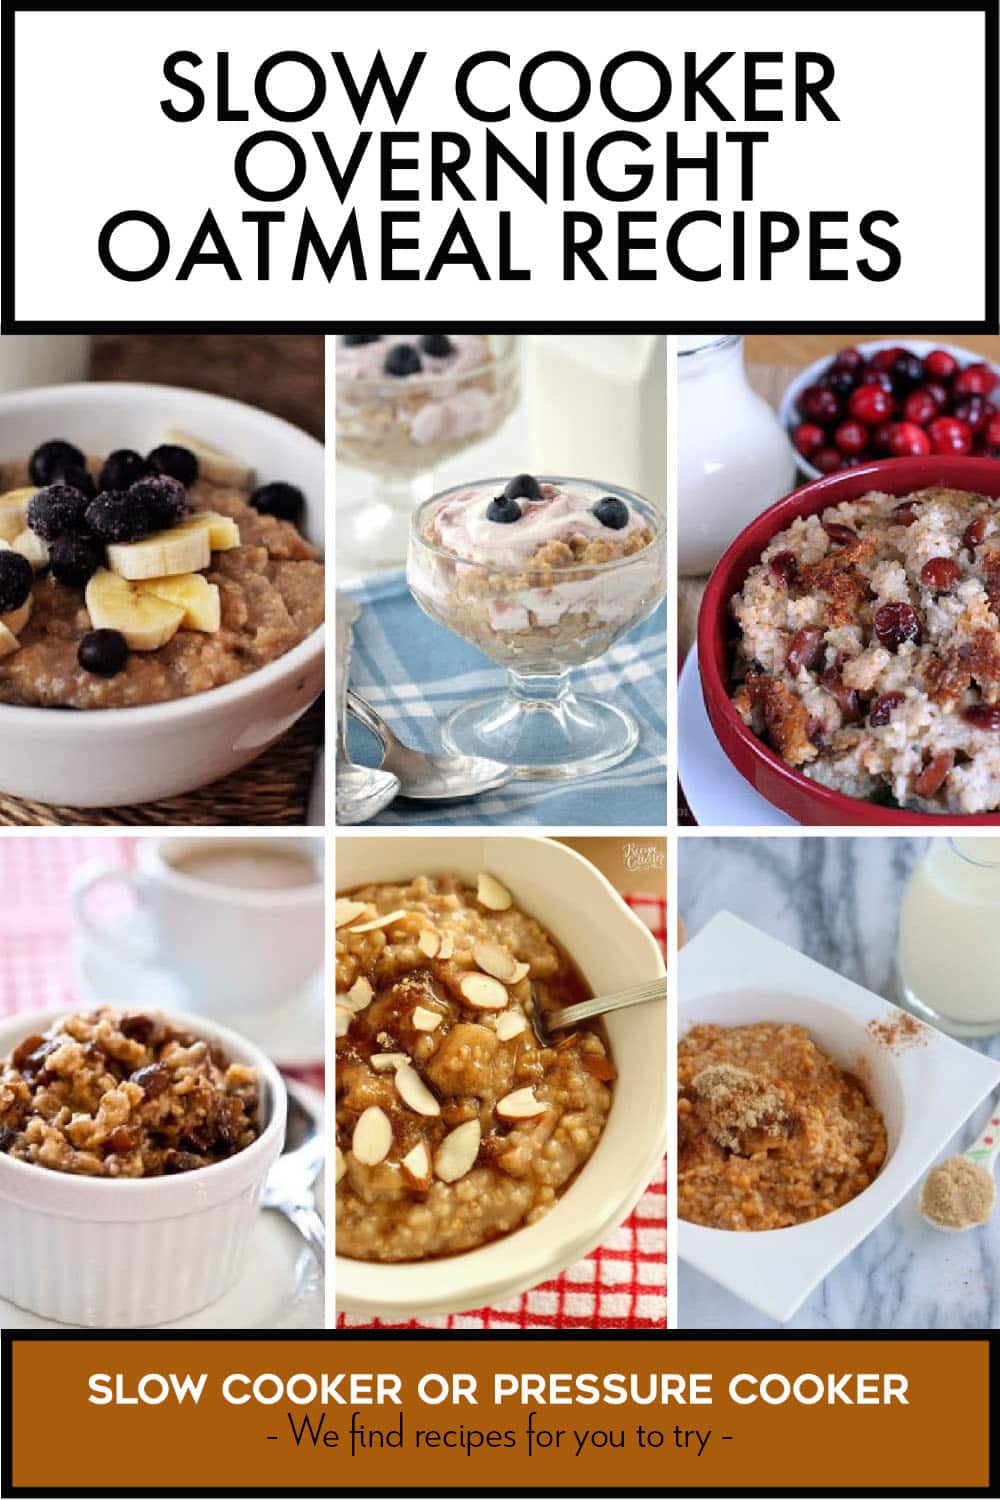 https://www.slowcookerfromscratch.com/wp-content/uploads/2022/05/SLOW-COOKER-OVERNIGHT-OATMEAL-RECIPES-1-copy.jpg